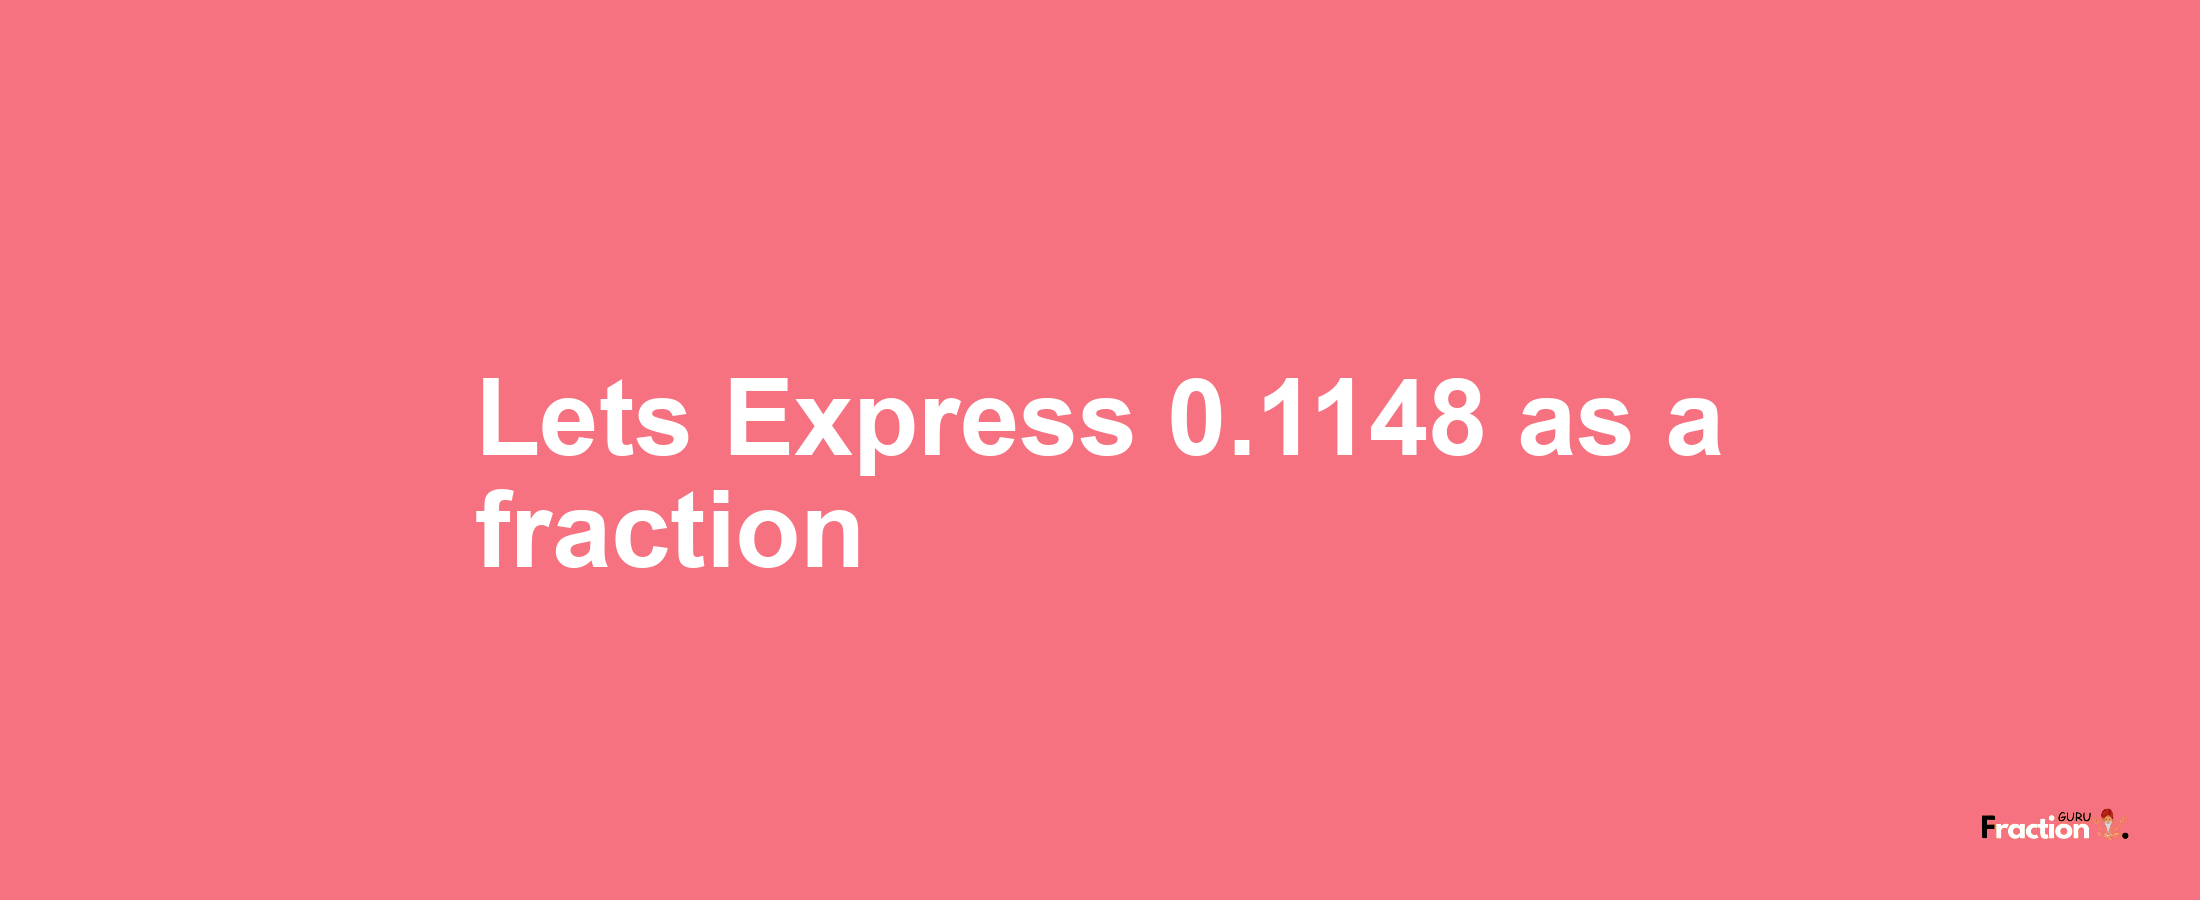 Lets Express 0.1148 as afraction